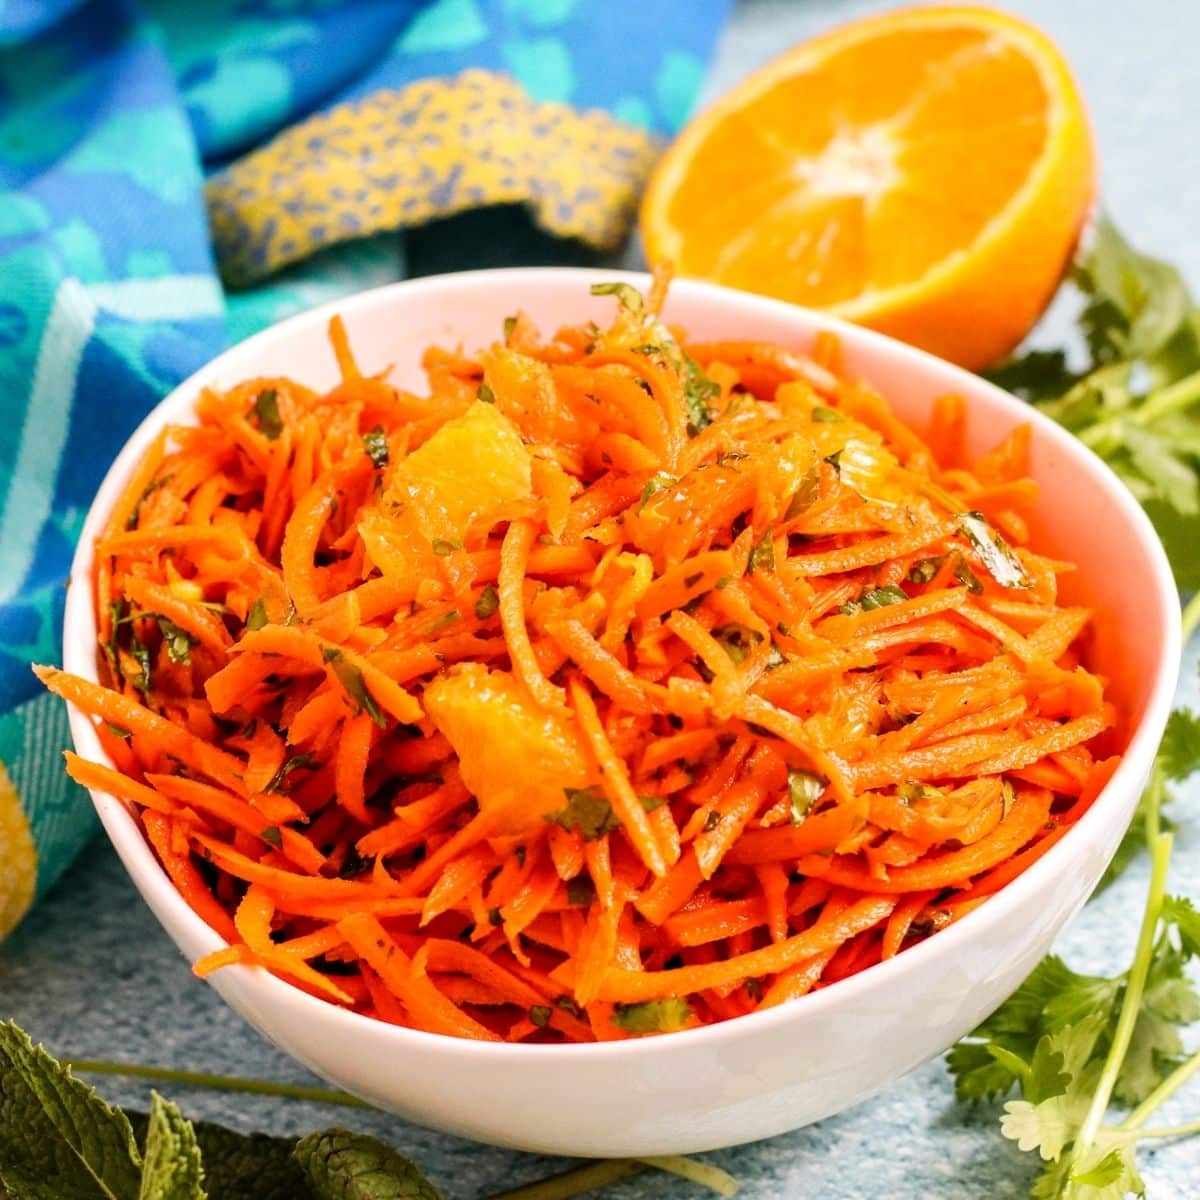 Moroccan Carrot and Orange Salad